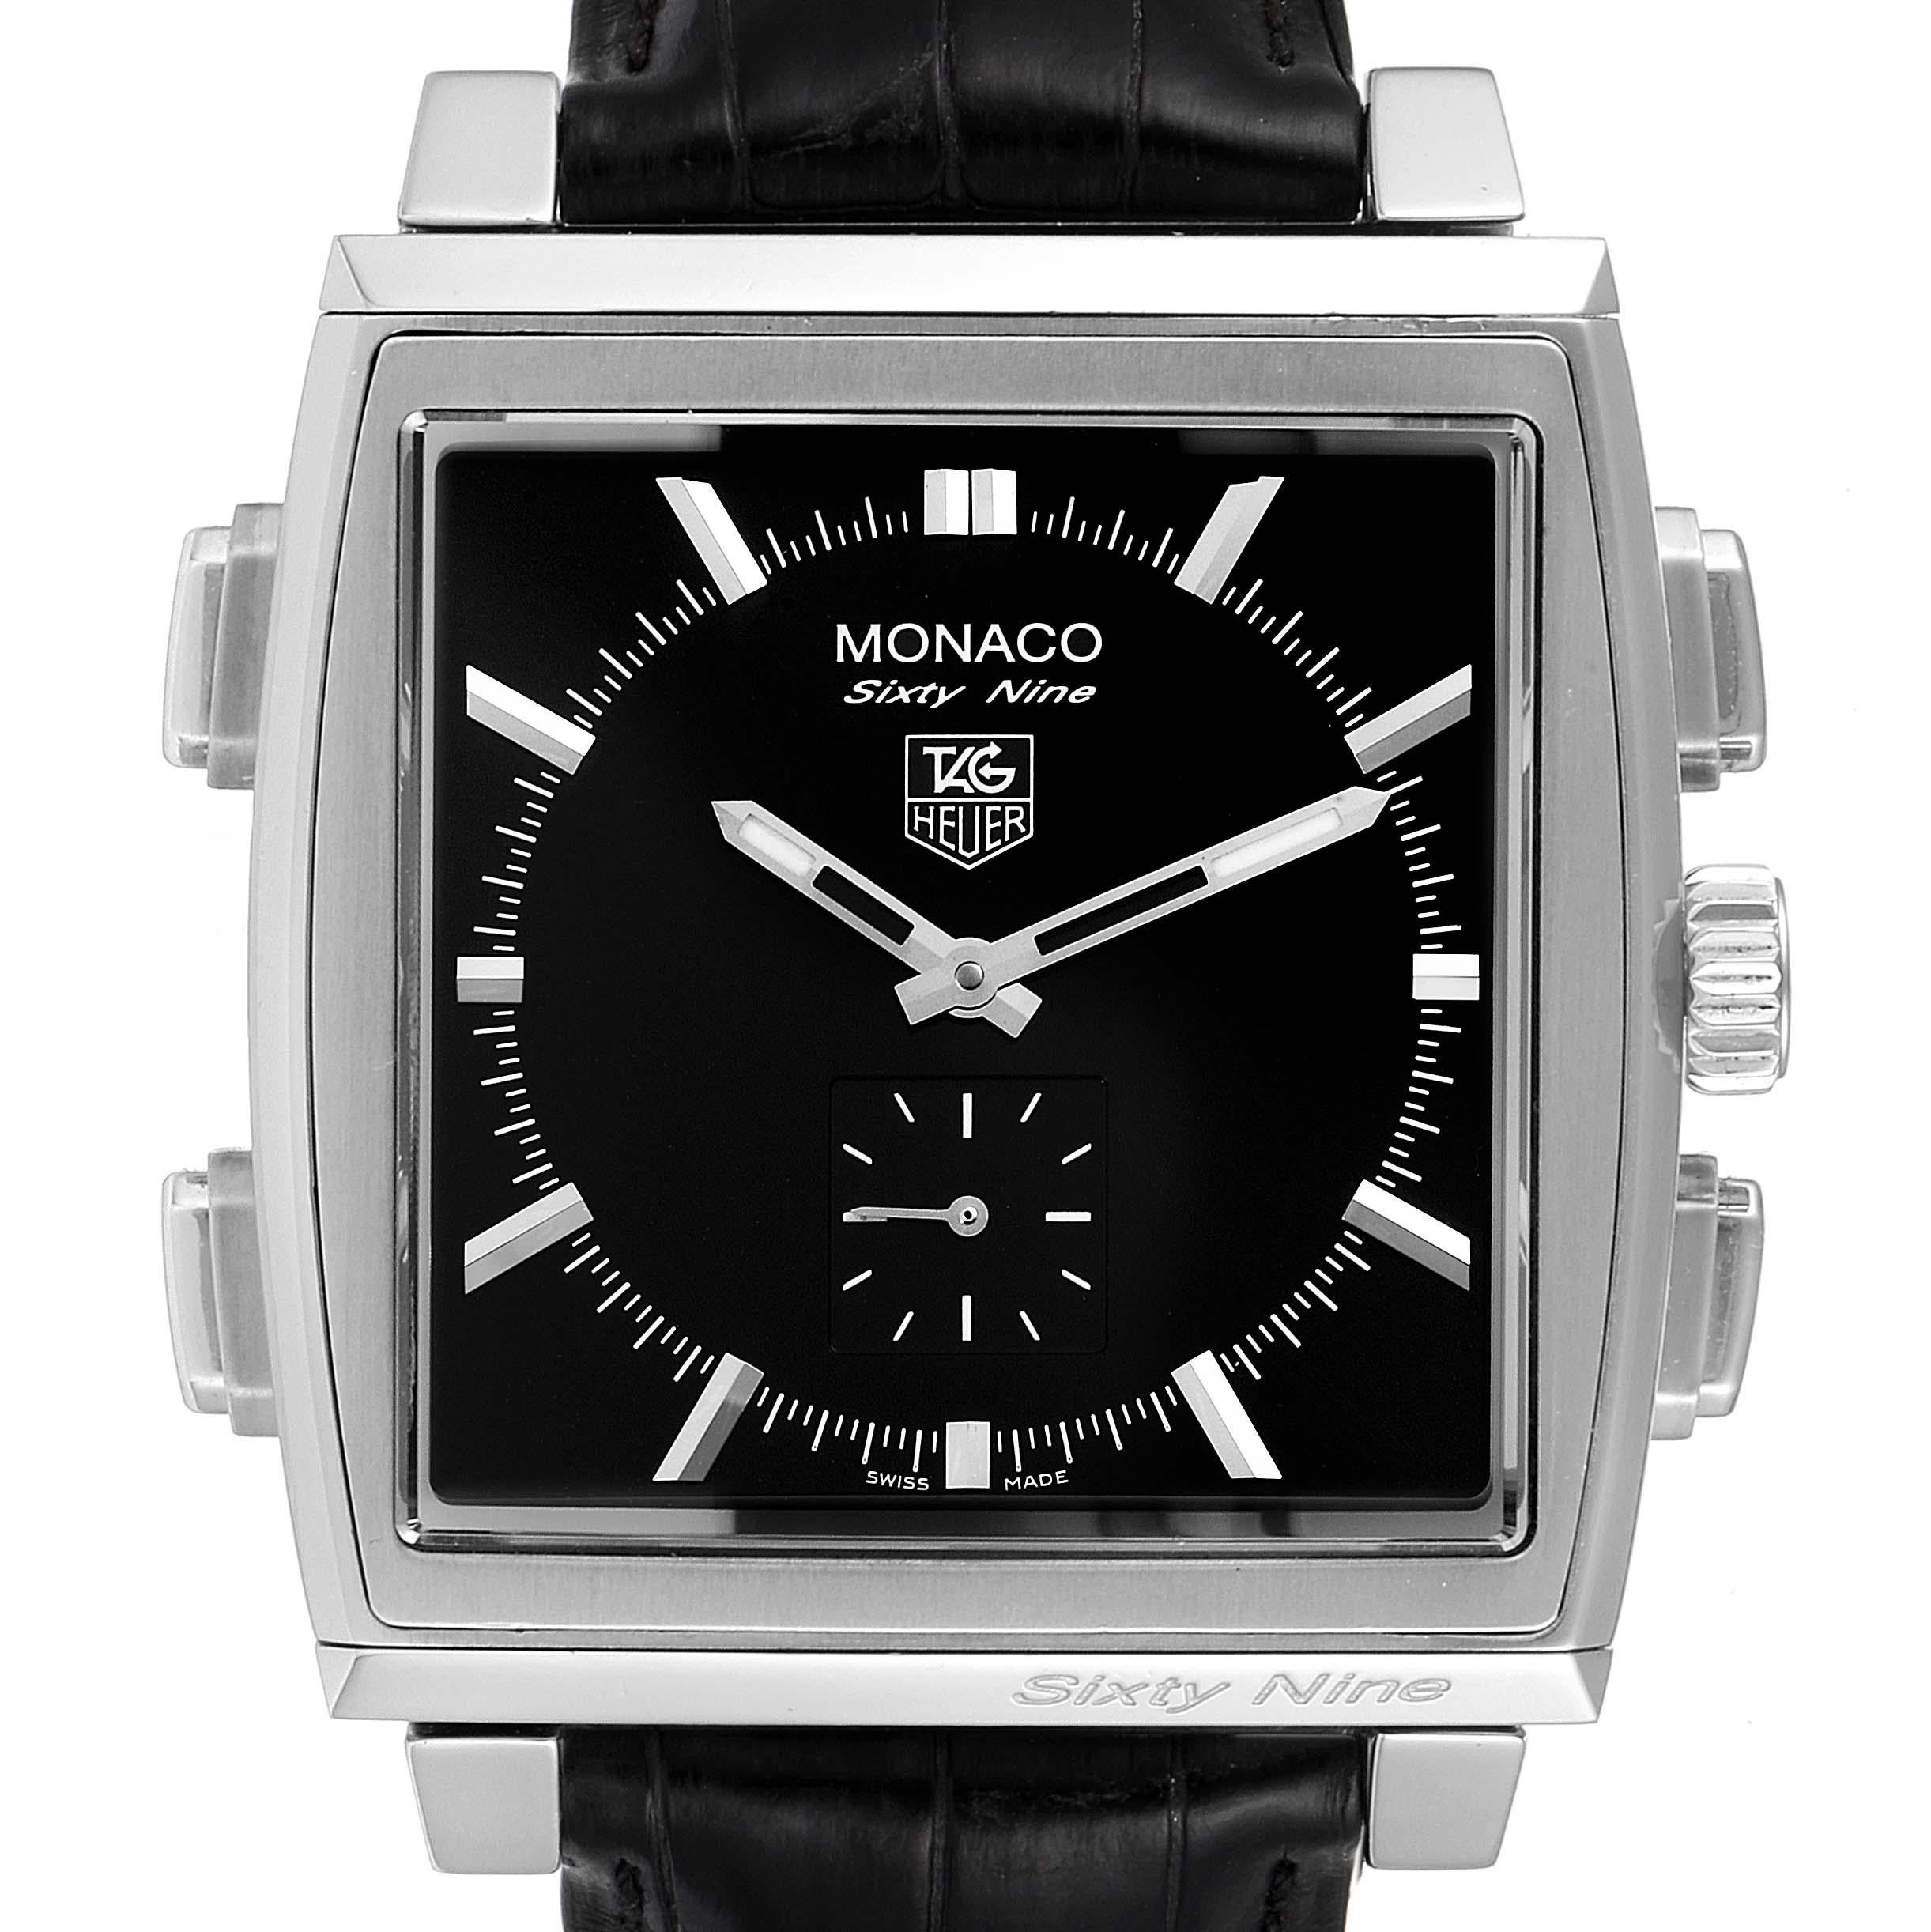 Tag Heuer Monaco Sixty-Nine Steel Analog Digital Flip Mens Watch CW9110. Manual-winding and quartz movement . Features: Time, Date, Alarm Function, 2nd time zone. Stainless steel five-body 40.4 mm rectangular swivel rotating case. Case thickness: